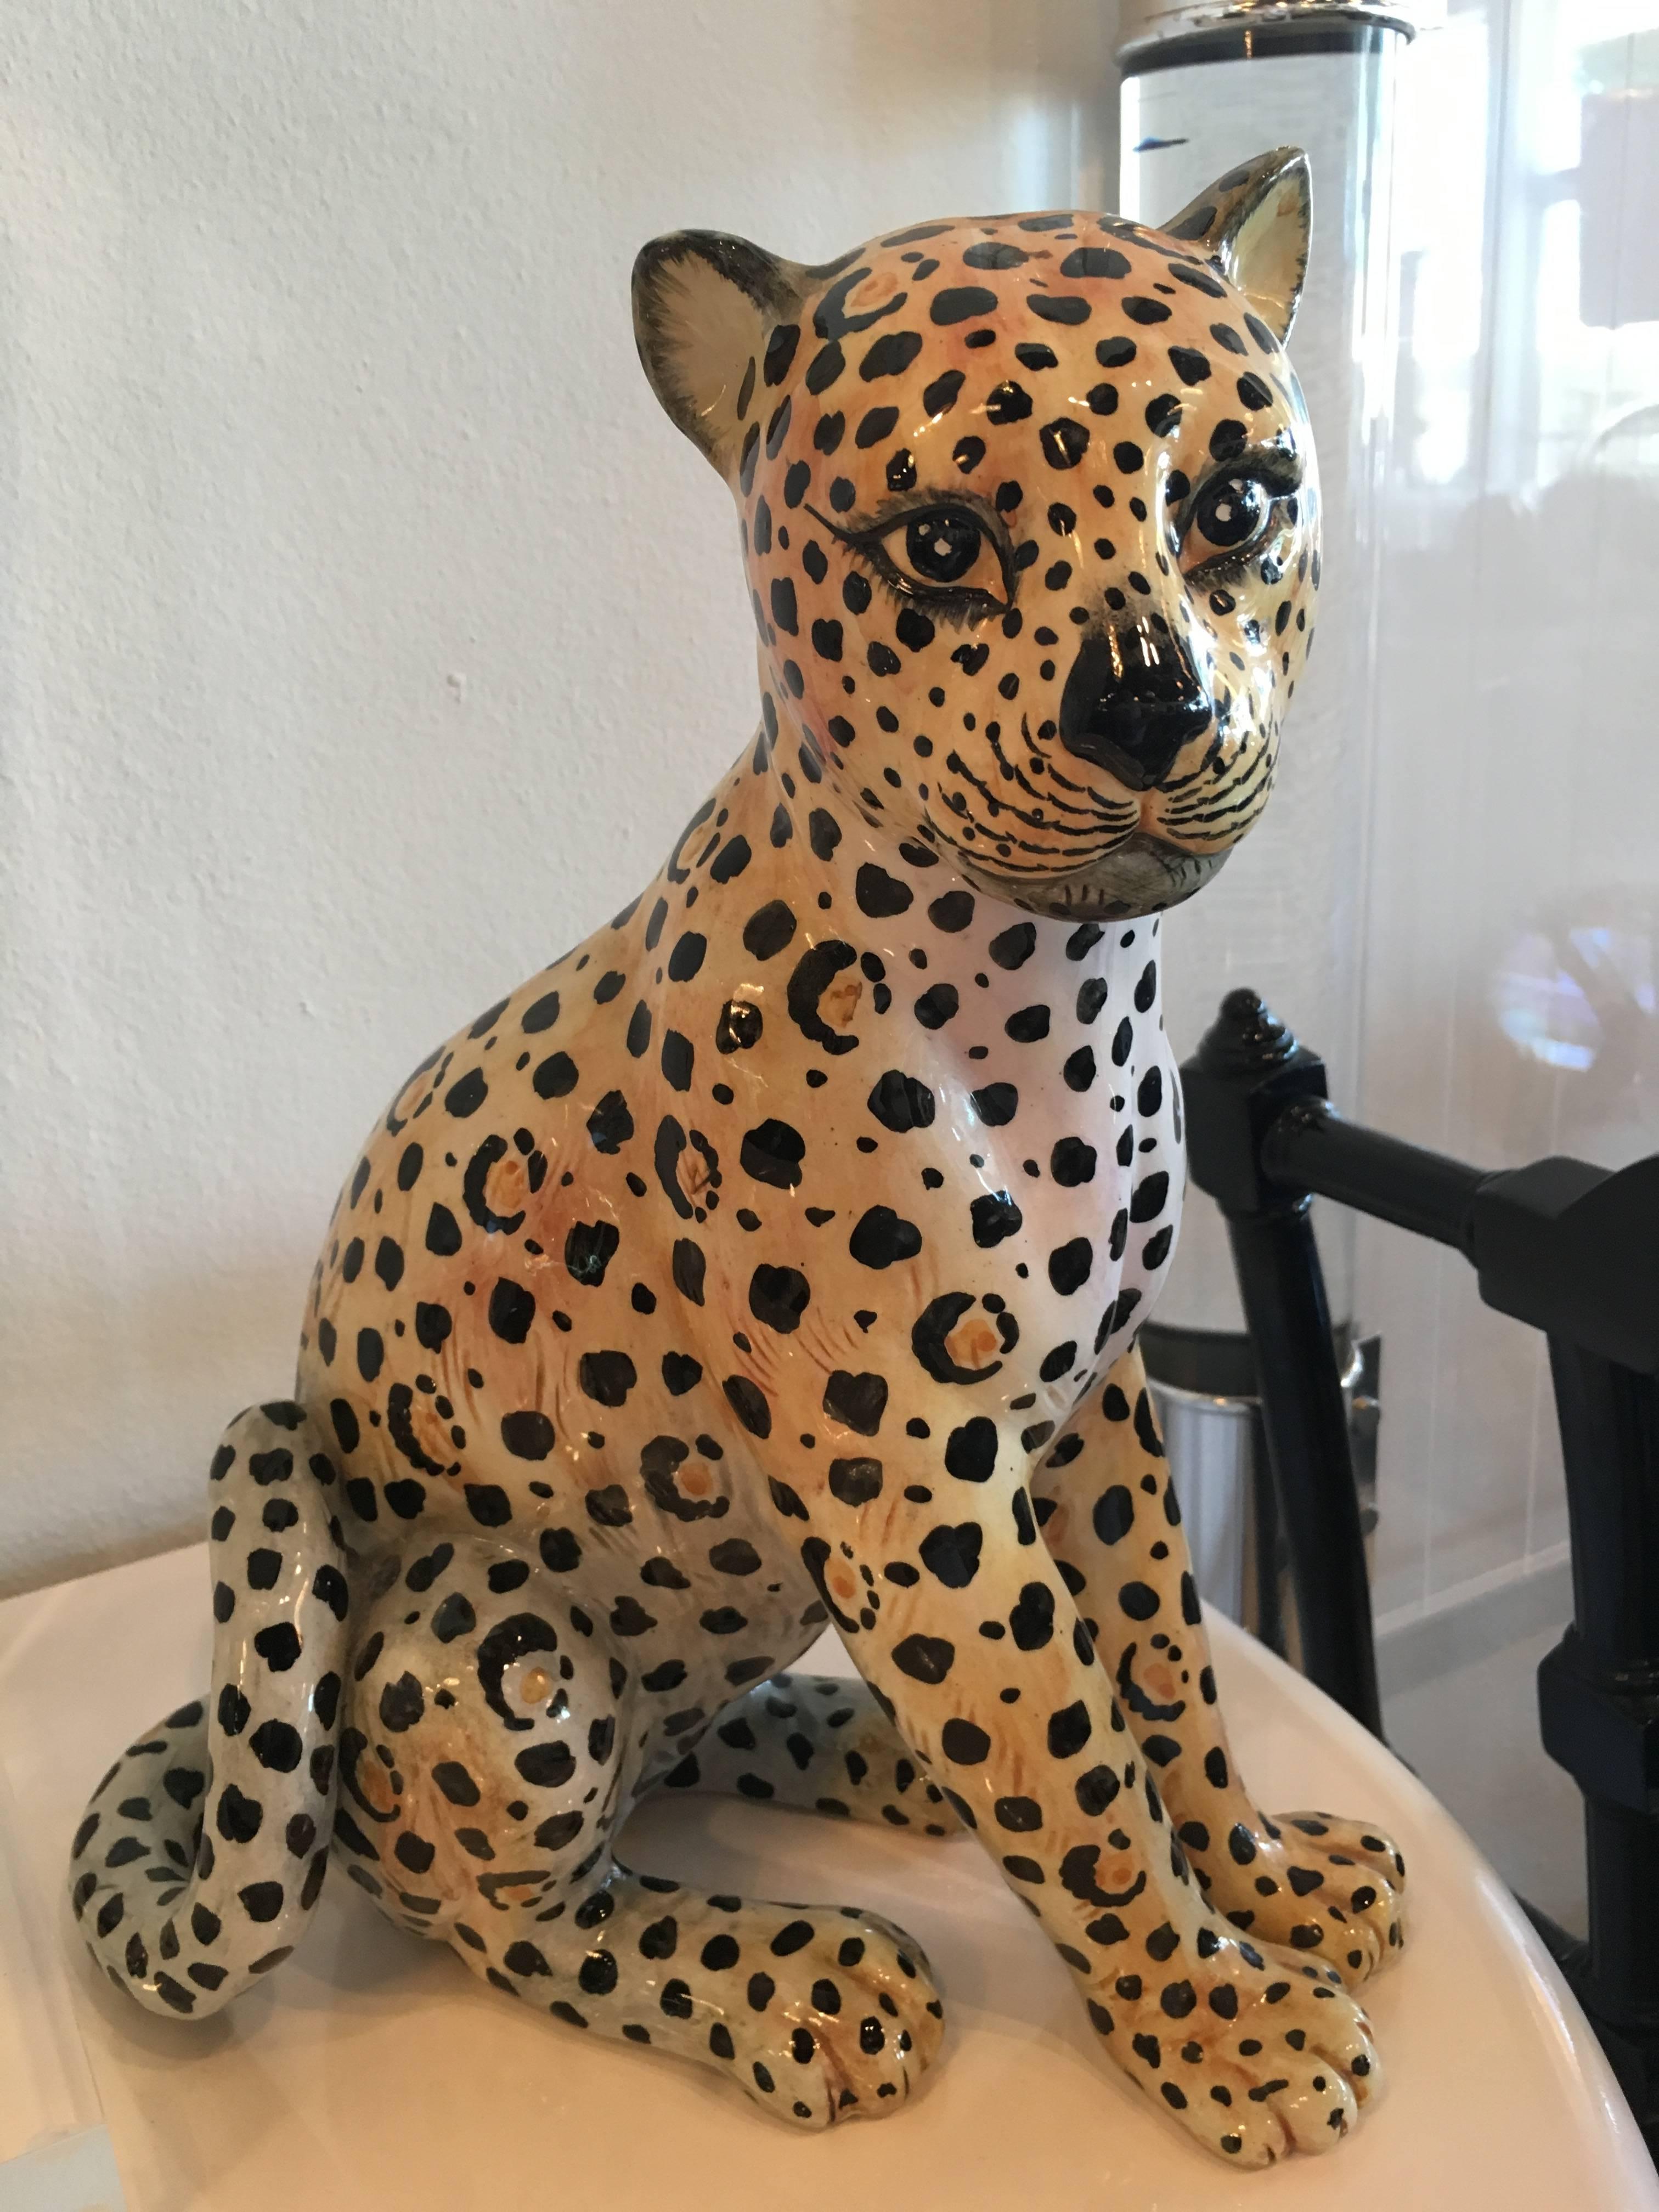 Wonderful vintage Cheetah statue, marked Made in Italy. No chips or breaks.